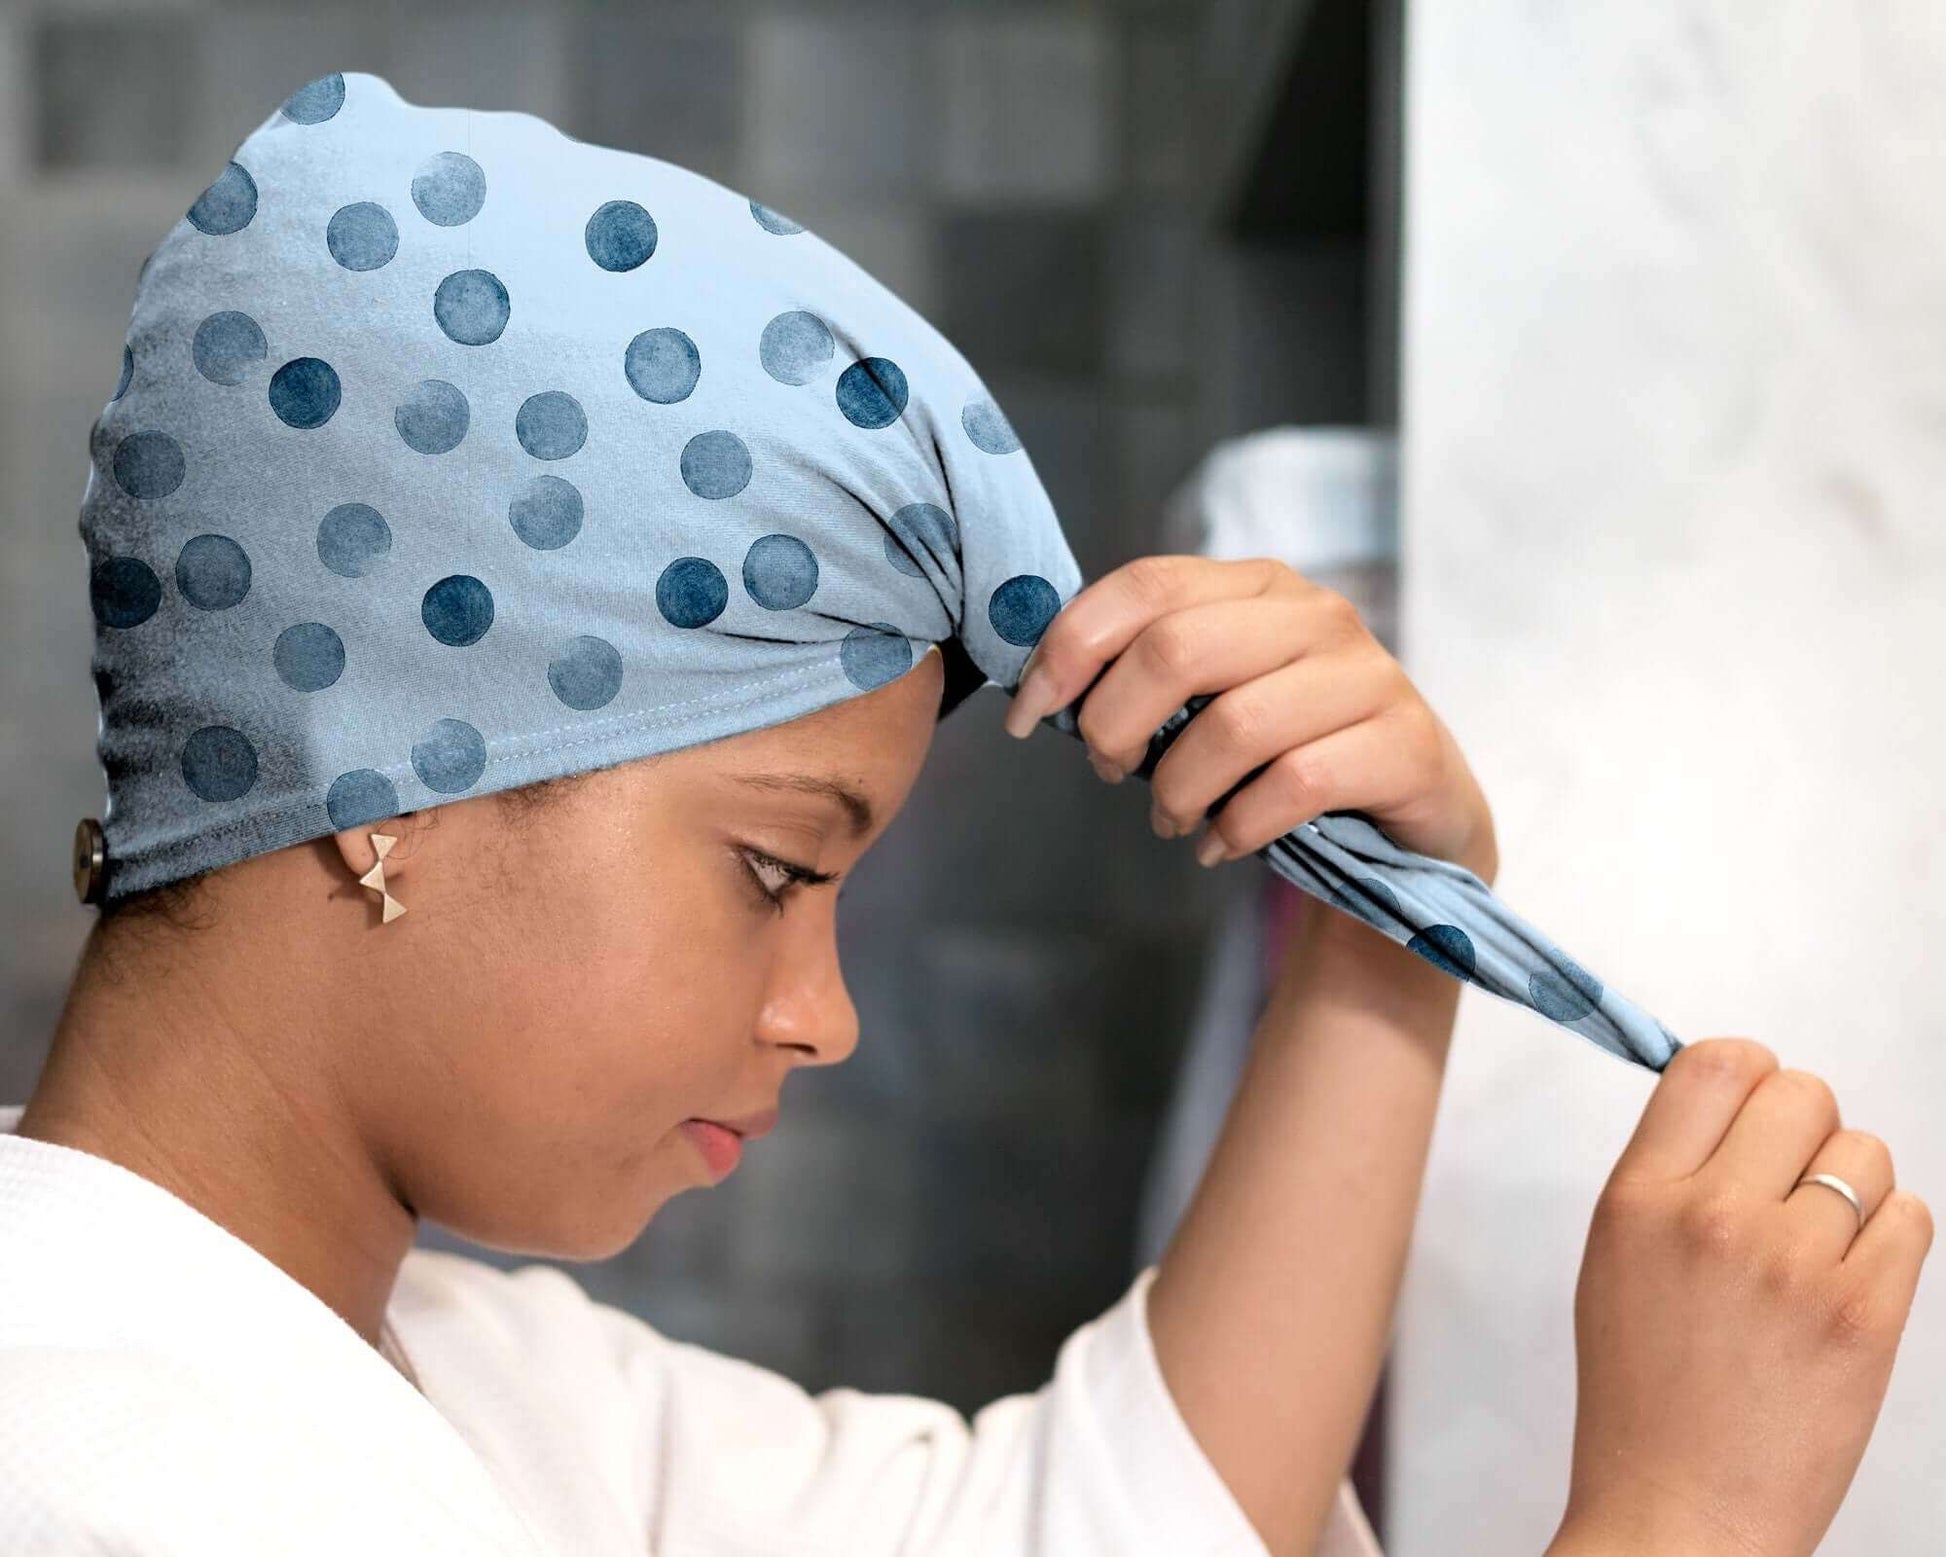 Blue Polka Dots T-Shirt Hair Towel Hood for Curly, Wavy, and Straight Hair - Soft, Absorbent, and Eco-Friendly